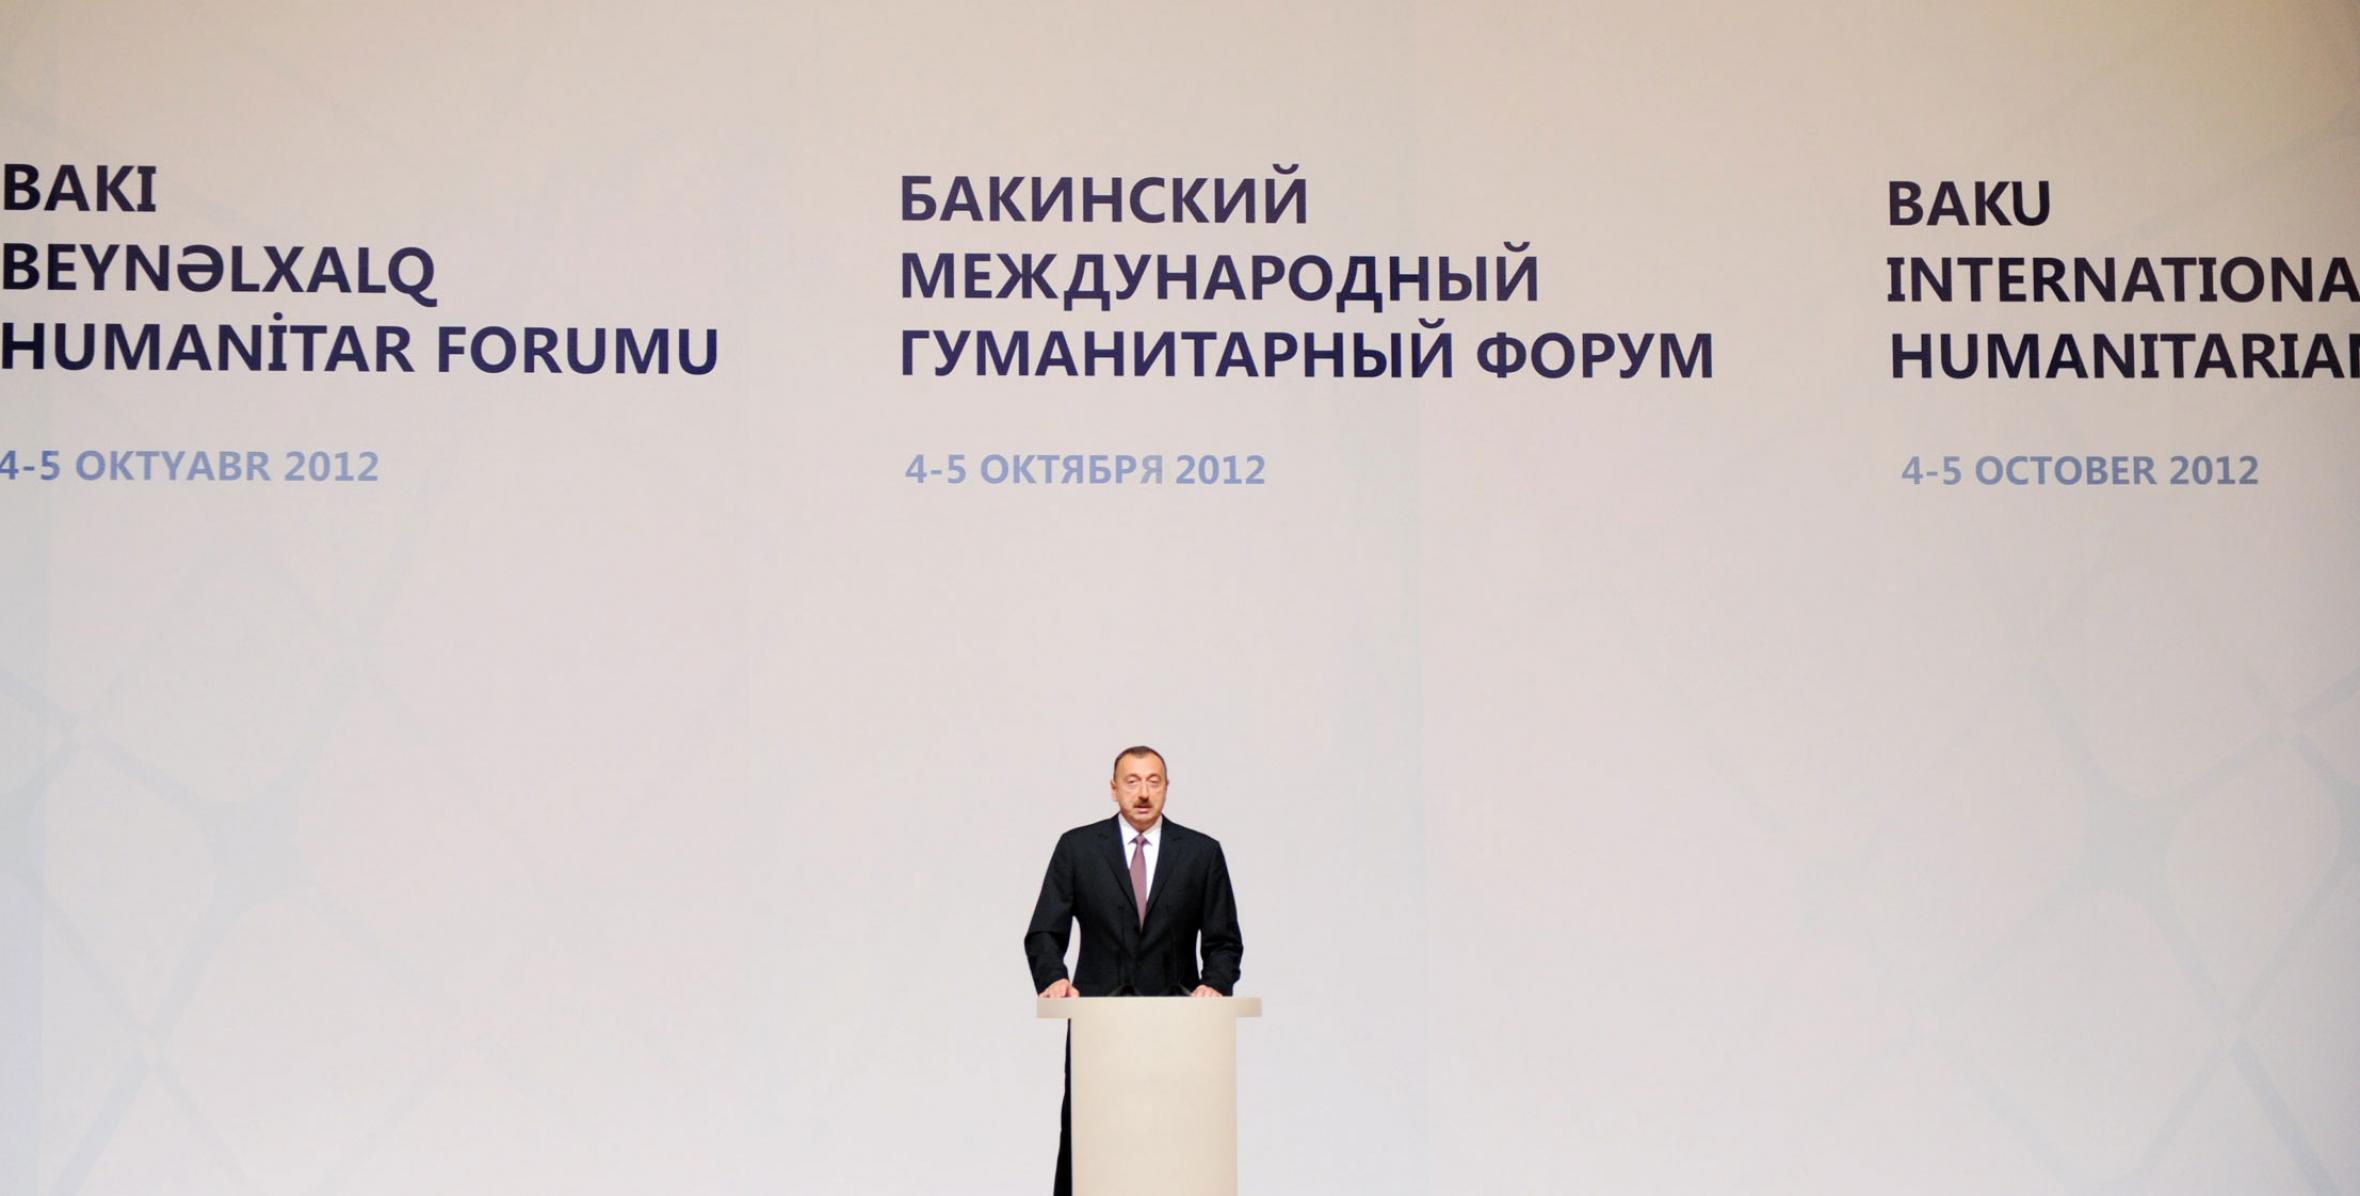 Ilham Aliyev attended the opening of the Second Baku International Humanitarian Forum